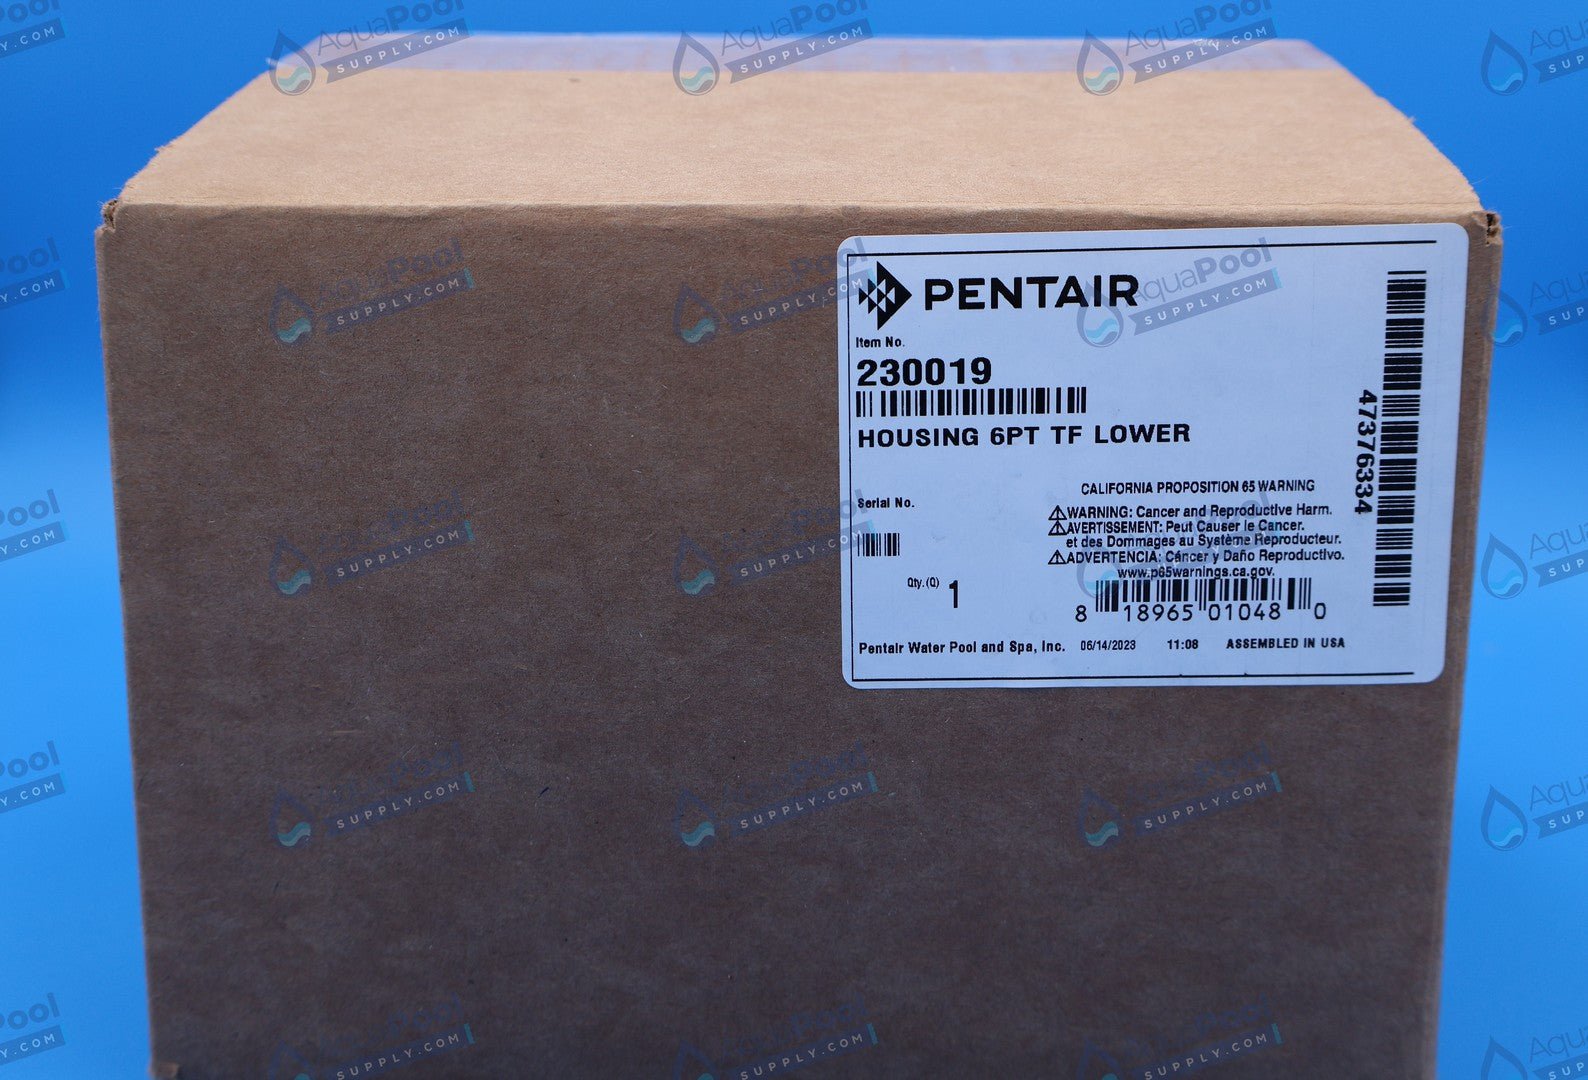 Pentair In-Floor (A&A) Top Feed 6 Port 1.5" Lower Housing 230019 - In Floor Cleaning System Valve Parts